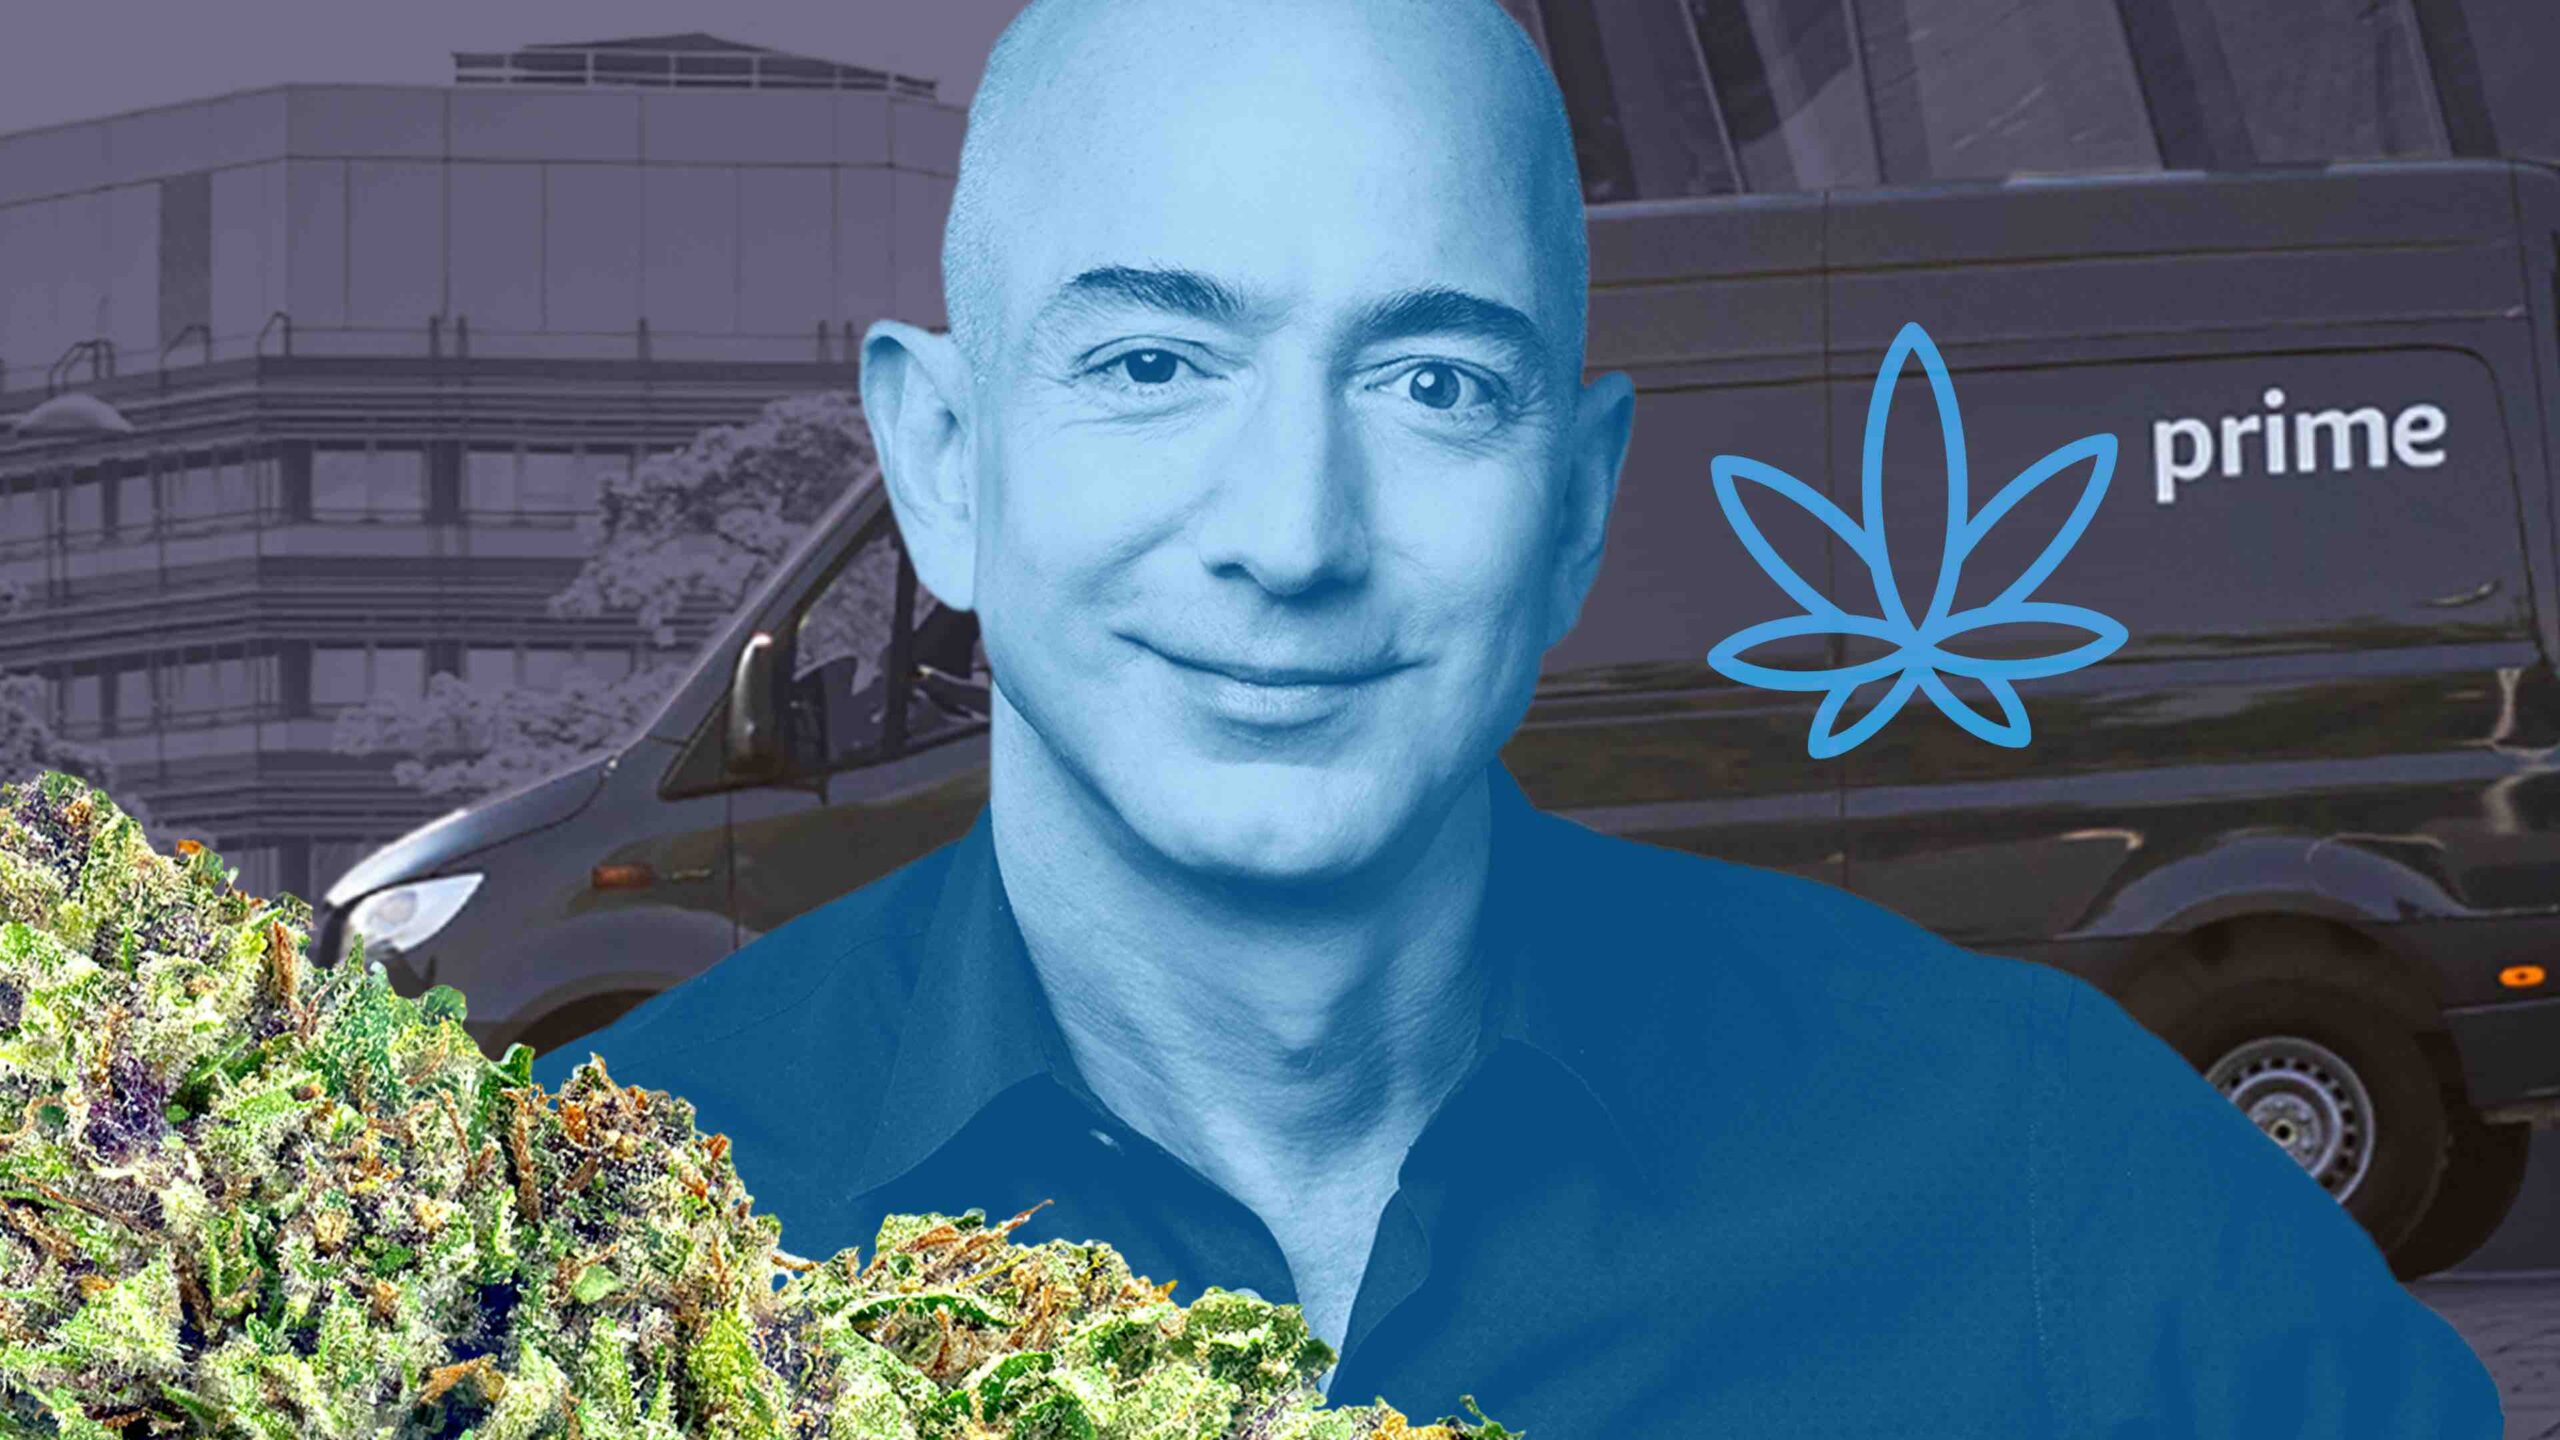 Yes, Amazon will sell weed. Stop worrying and start acting